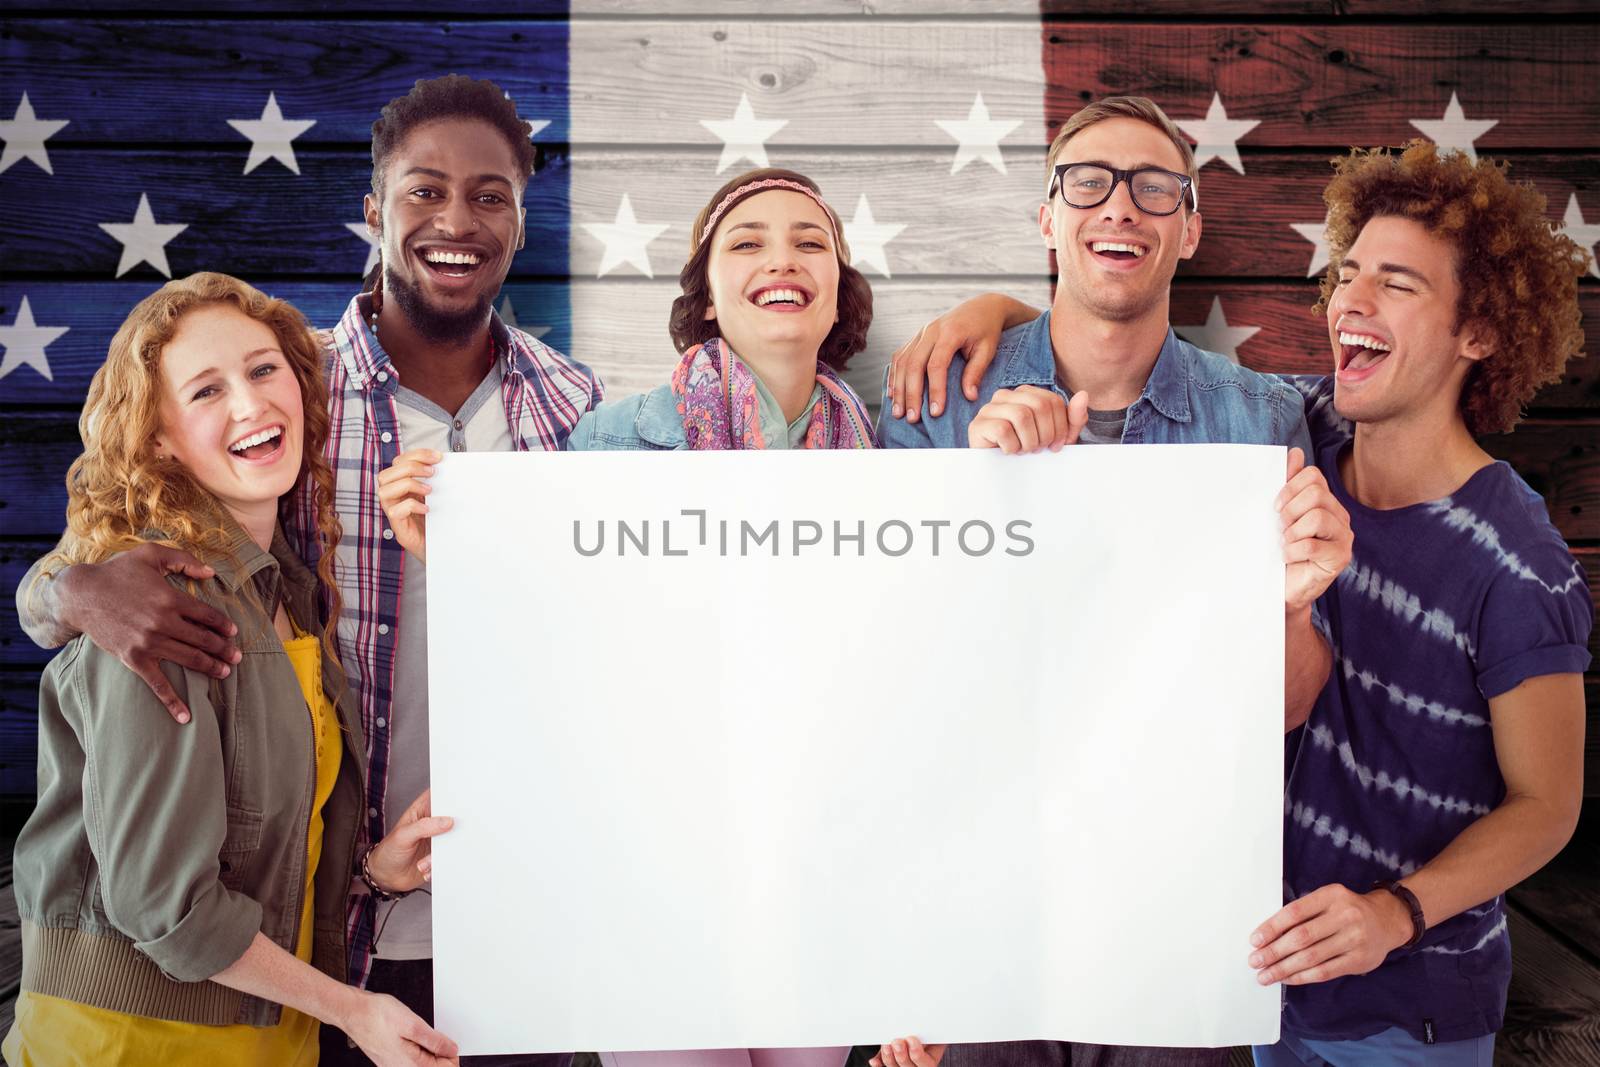 Fashion students smiling at camera together against composite image of usa national flag